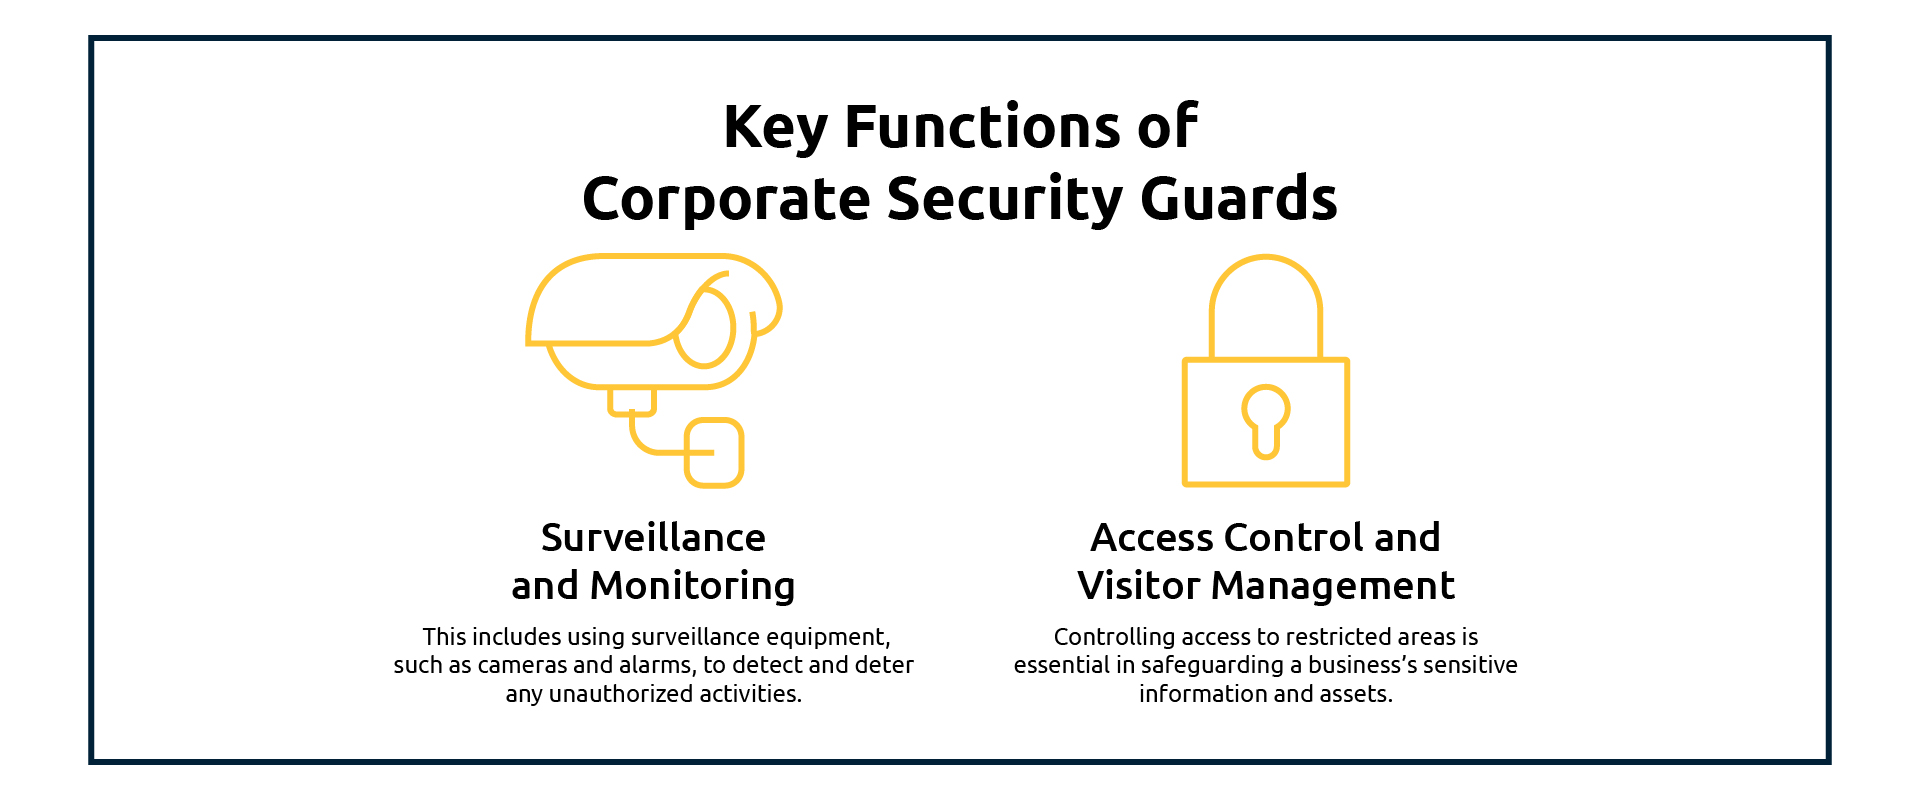 Key Functions of Corporate Security Guards